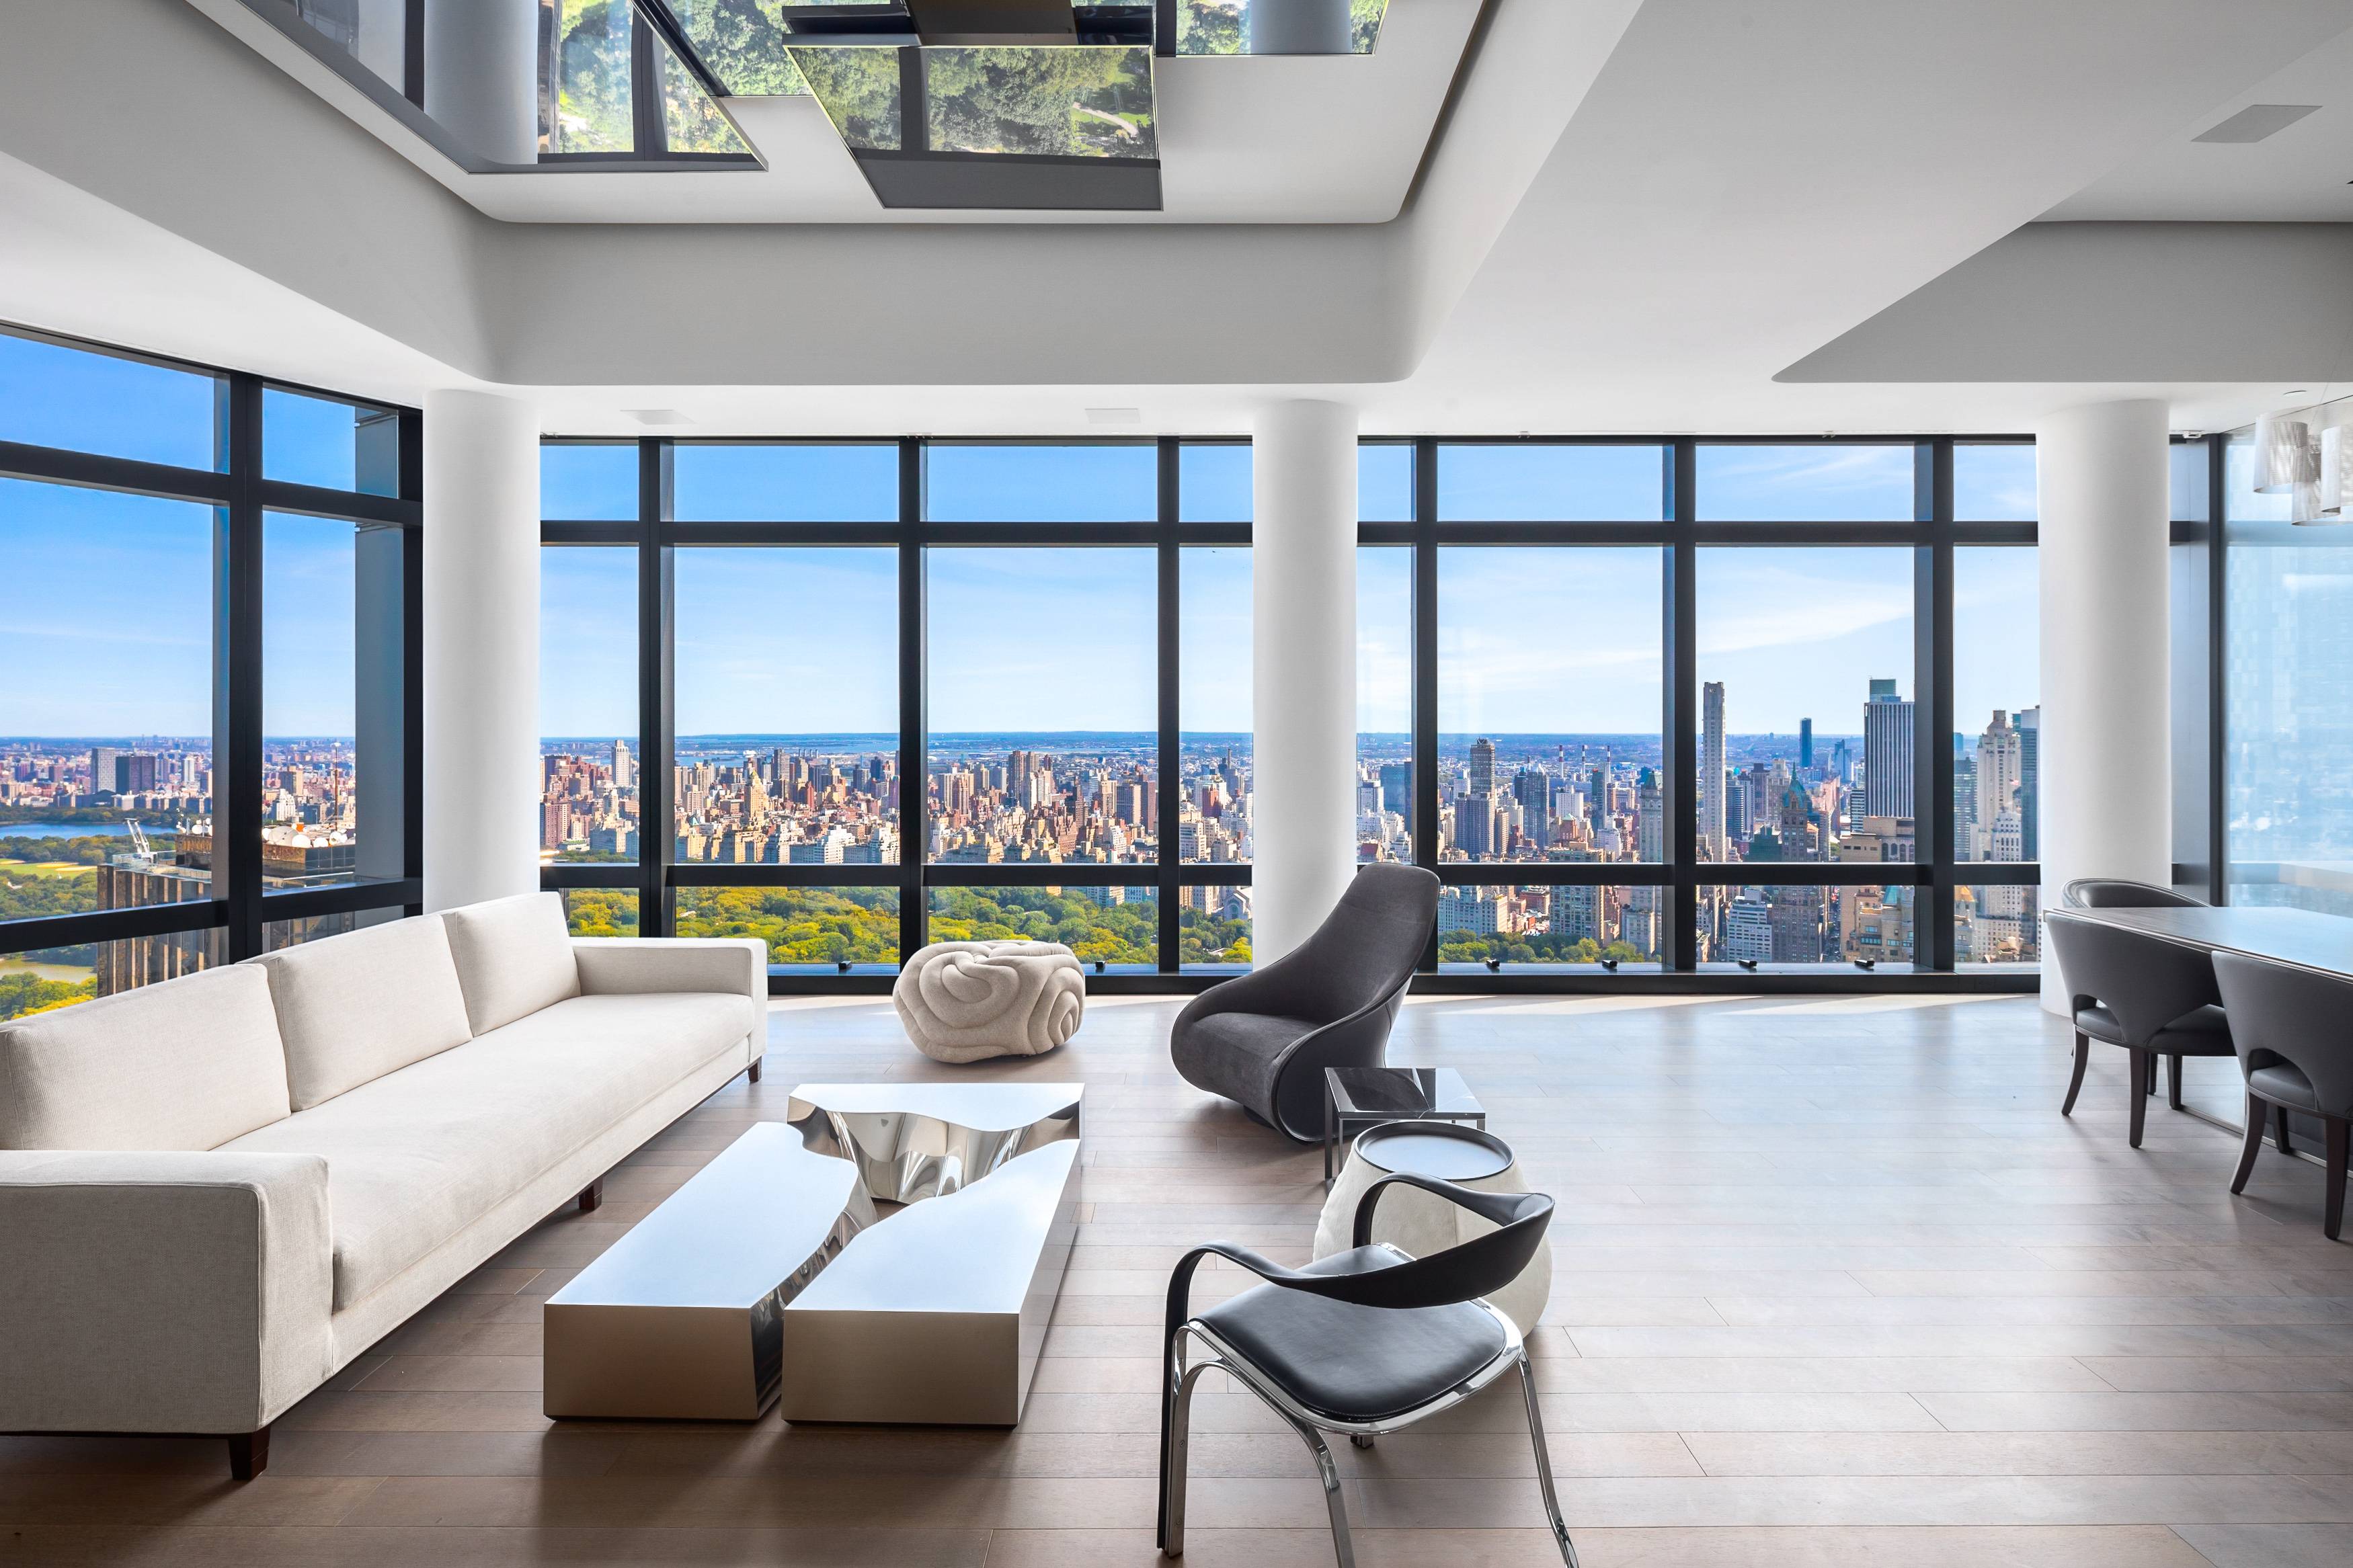 With commanding views across Central Park and up the Hudson River, this custom built, 4 bedroom, 4.